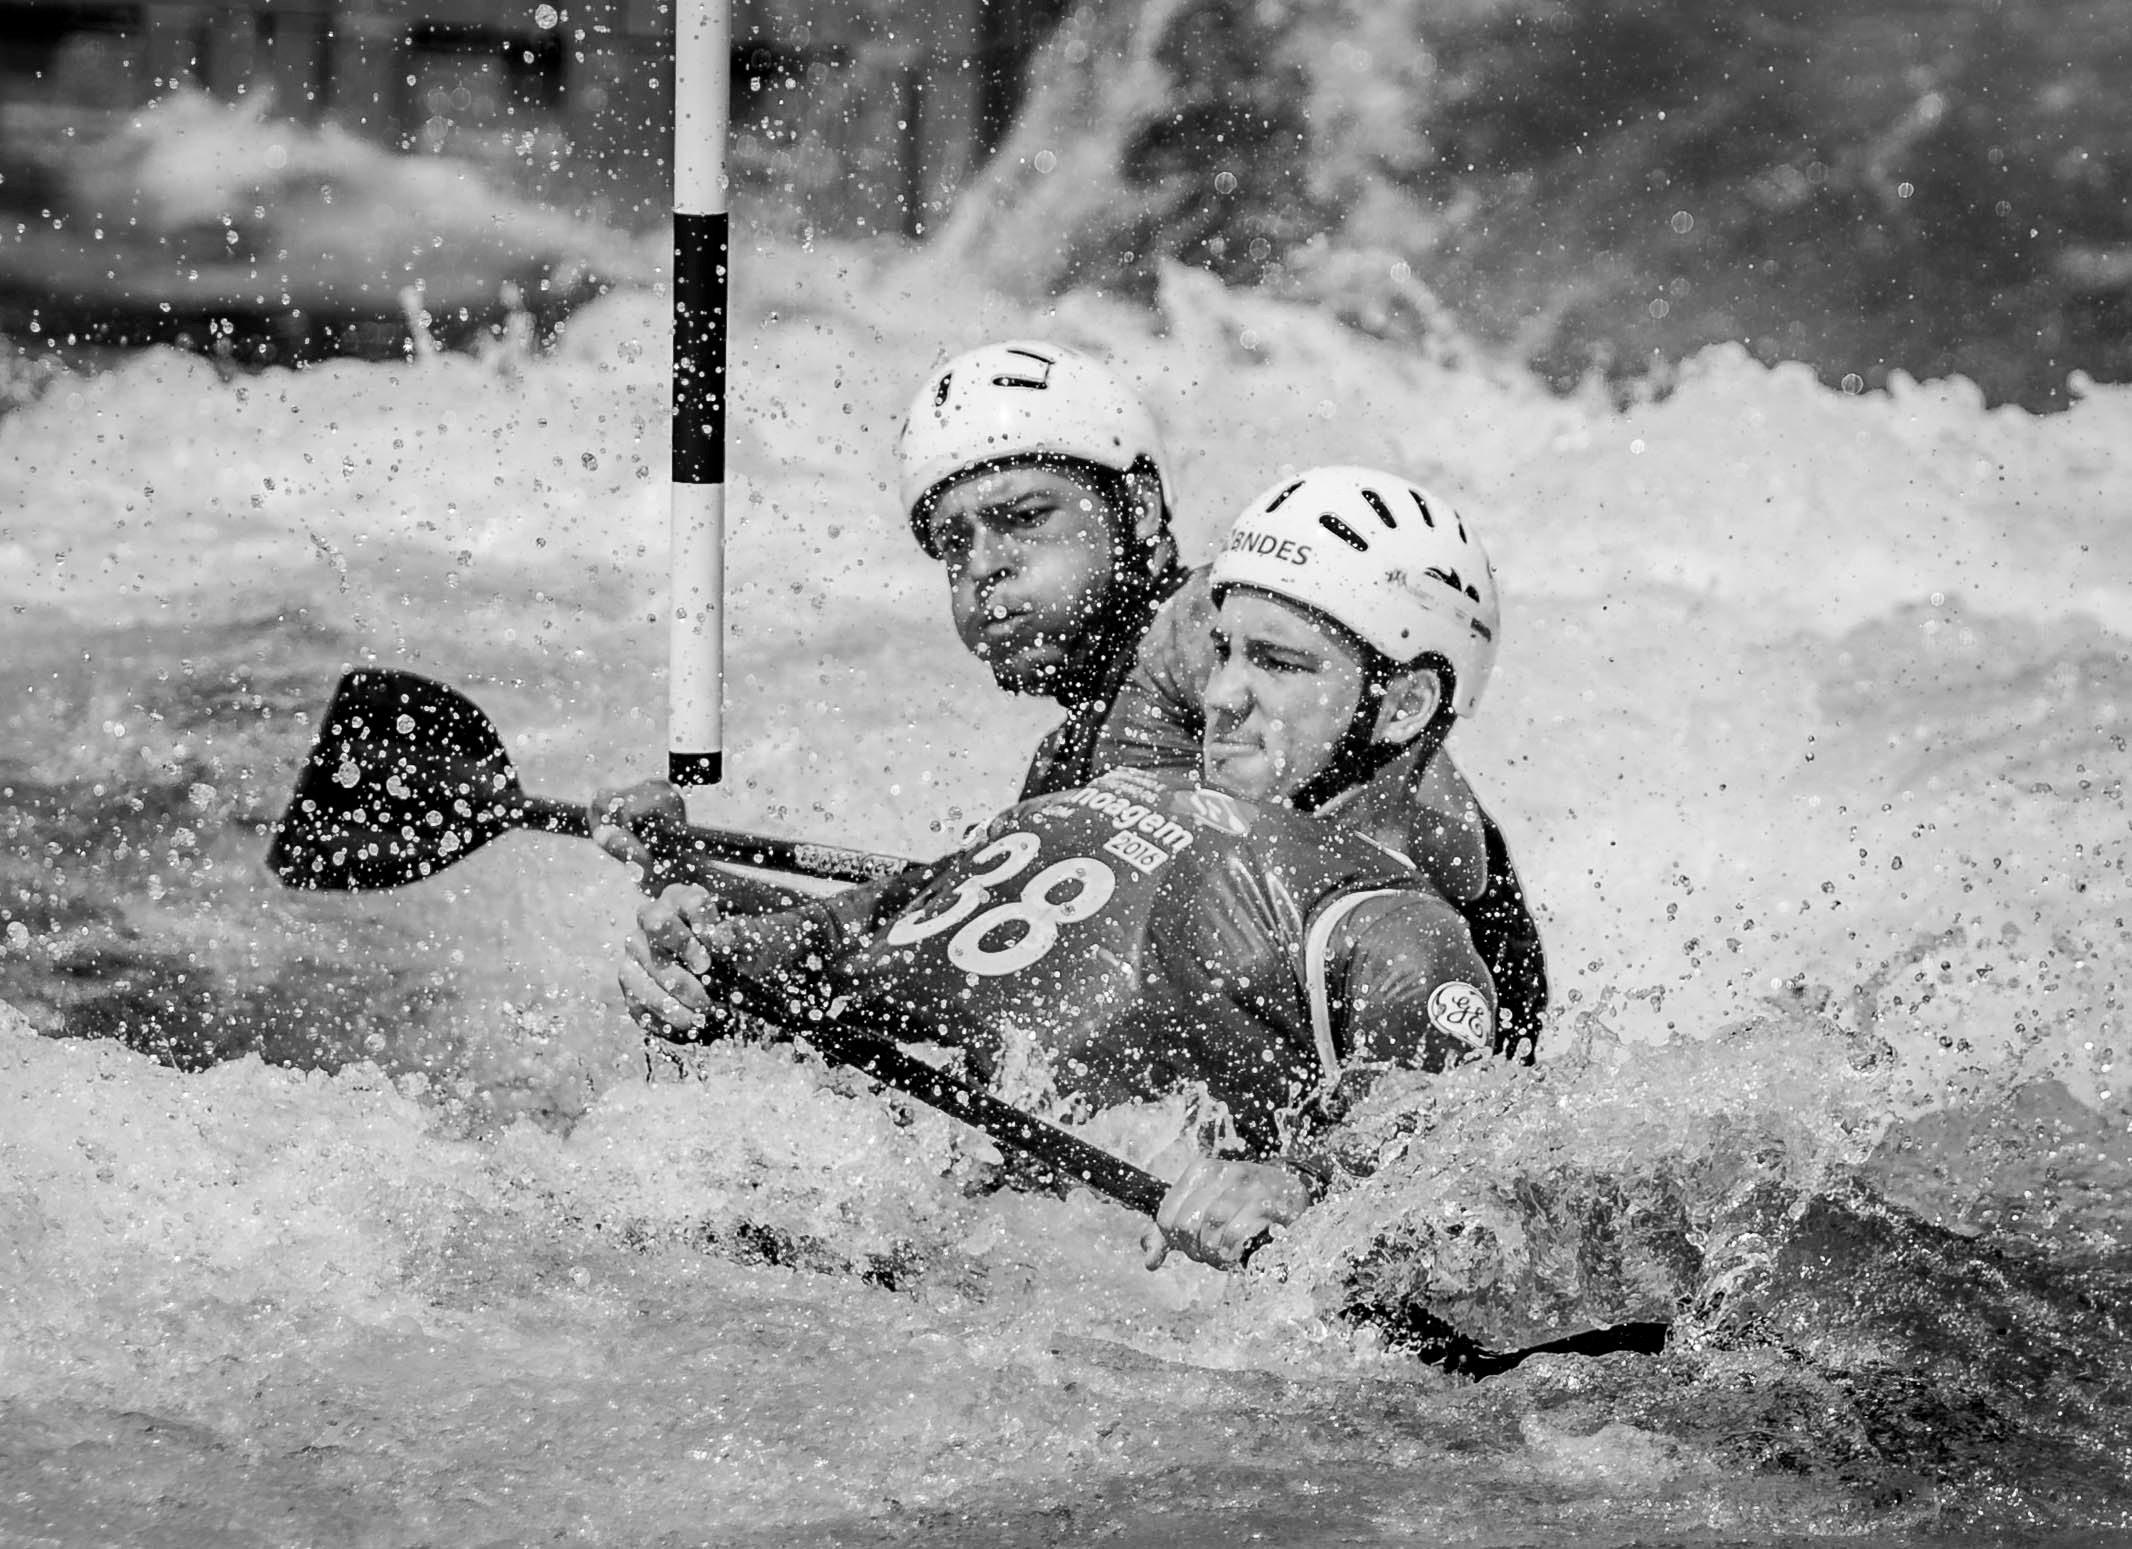 man water rafting in grayscale photo